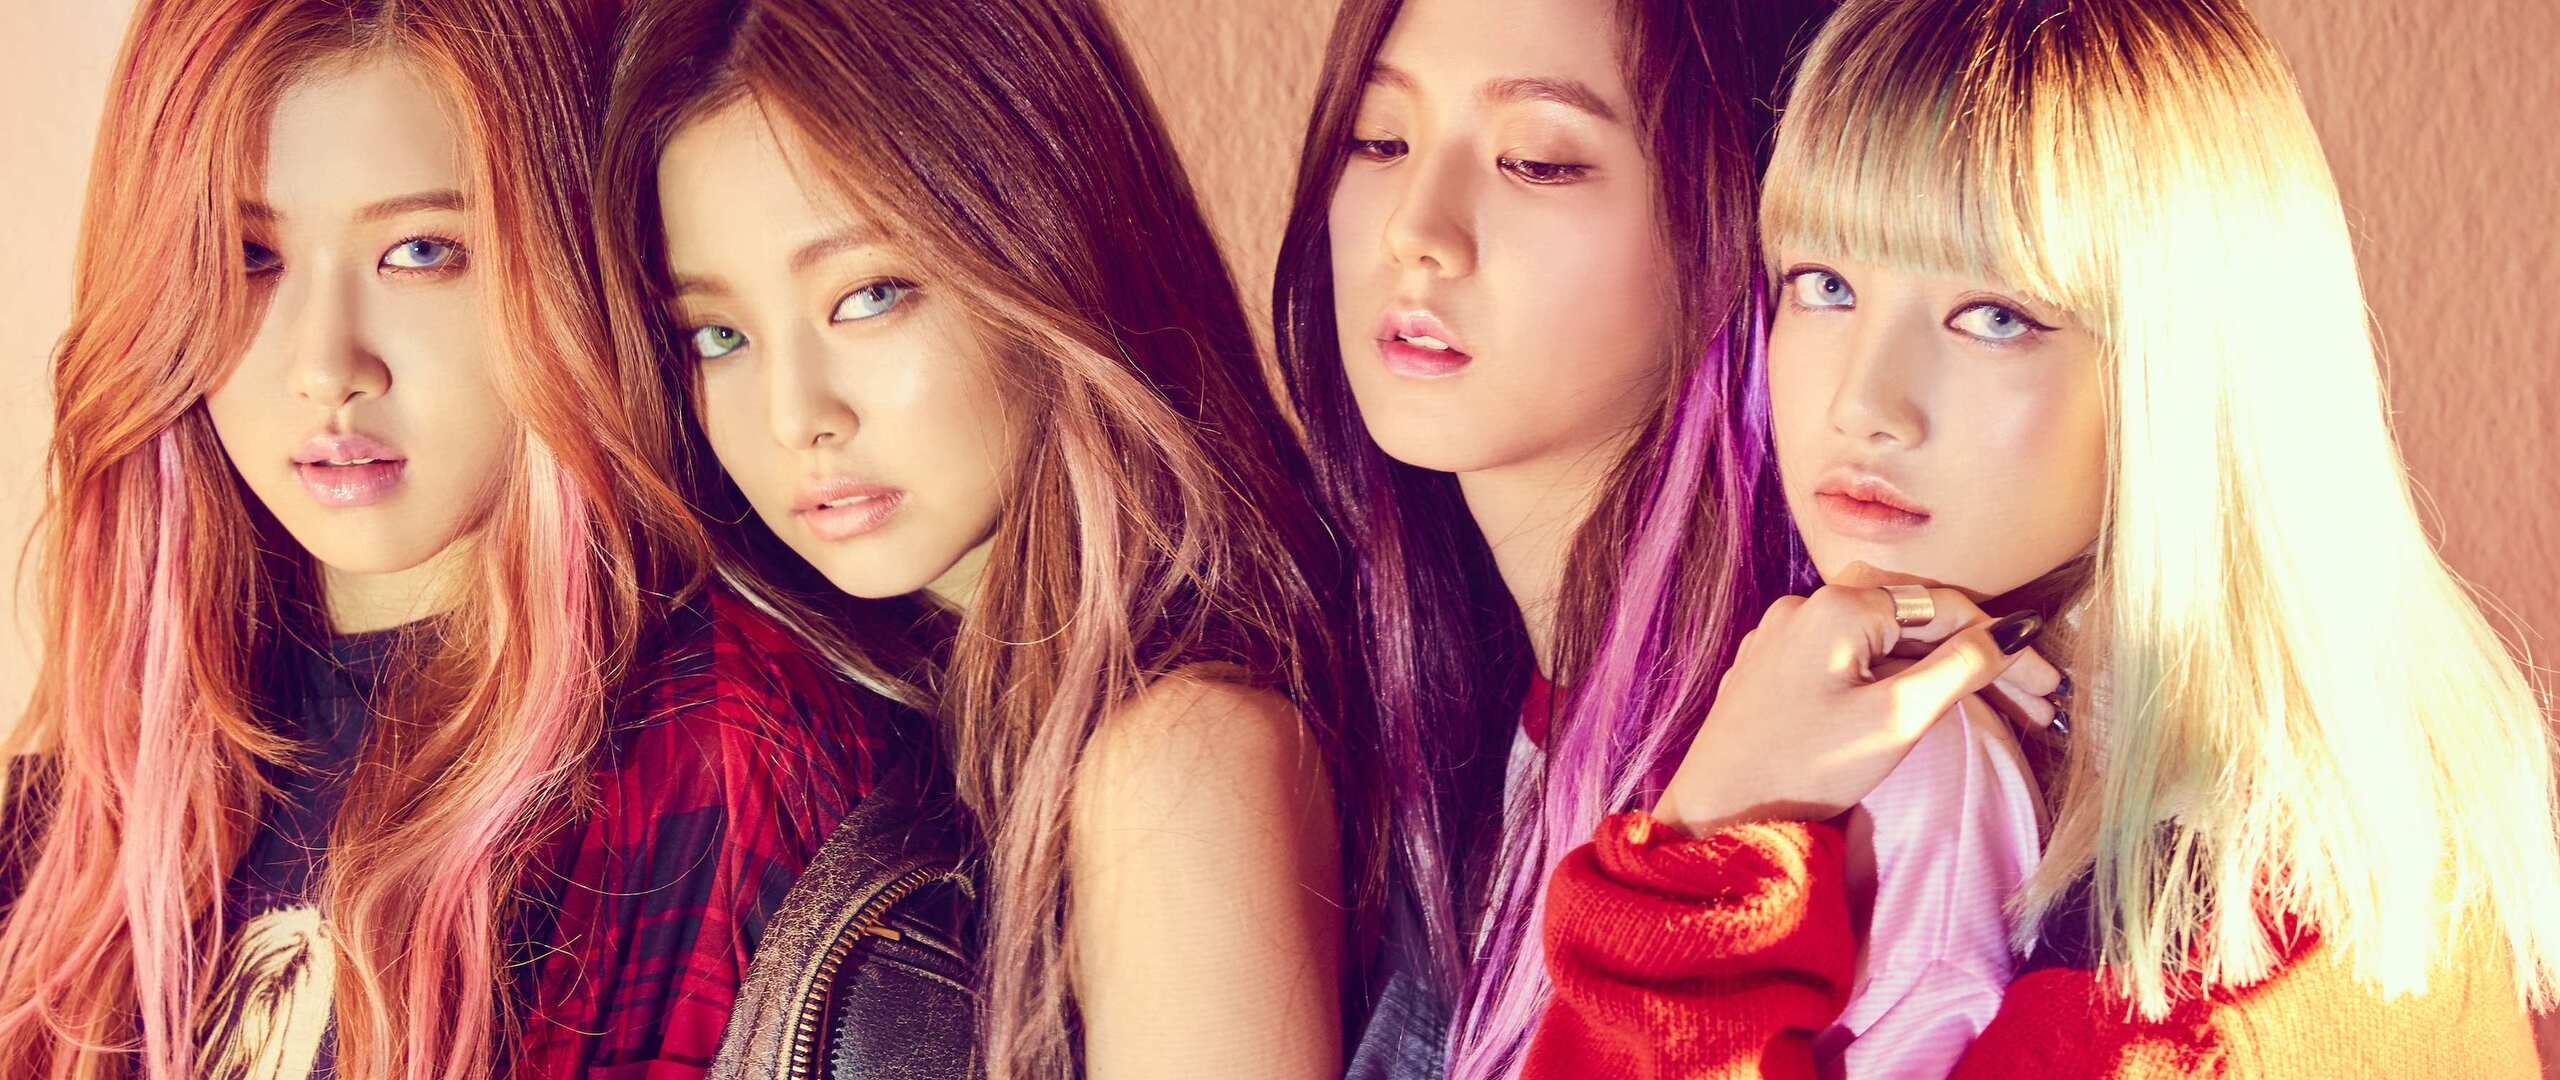 2560x1080 Blackpink 2560x1080 Resolution Hd 4k Wallpapers Images Backgrounds Photos And Pictures